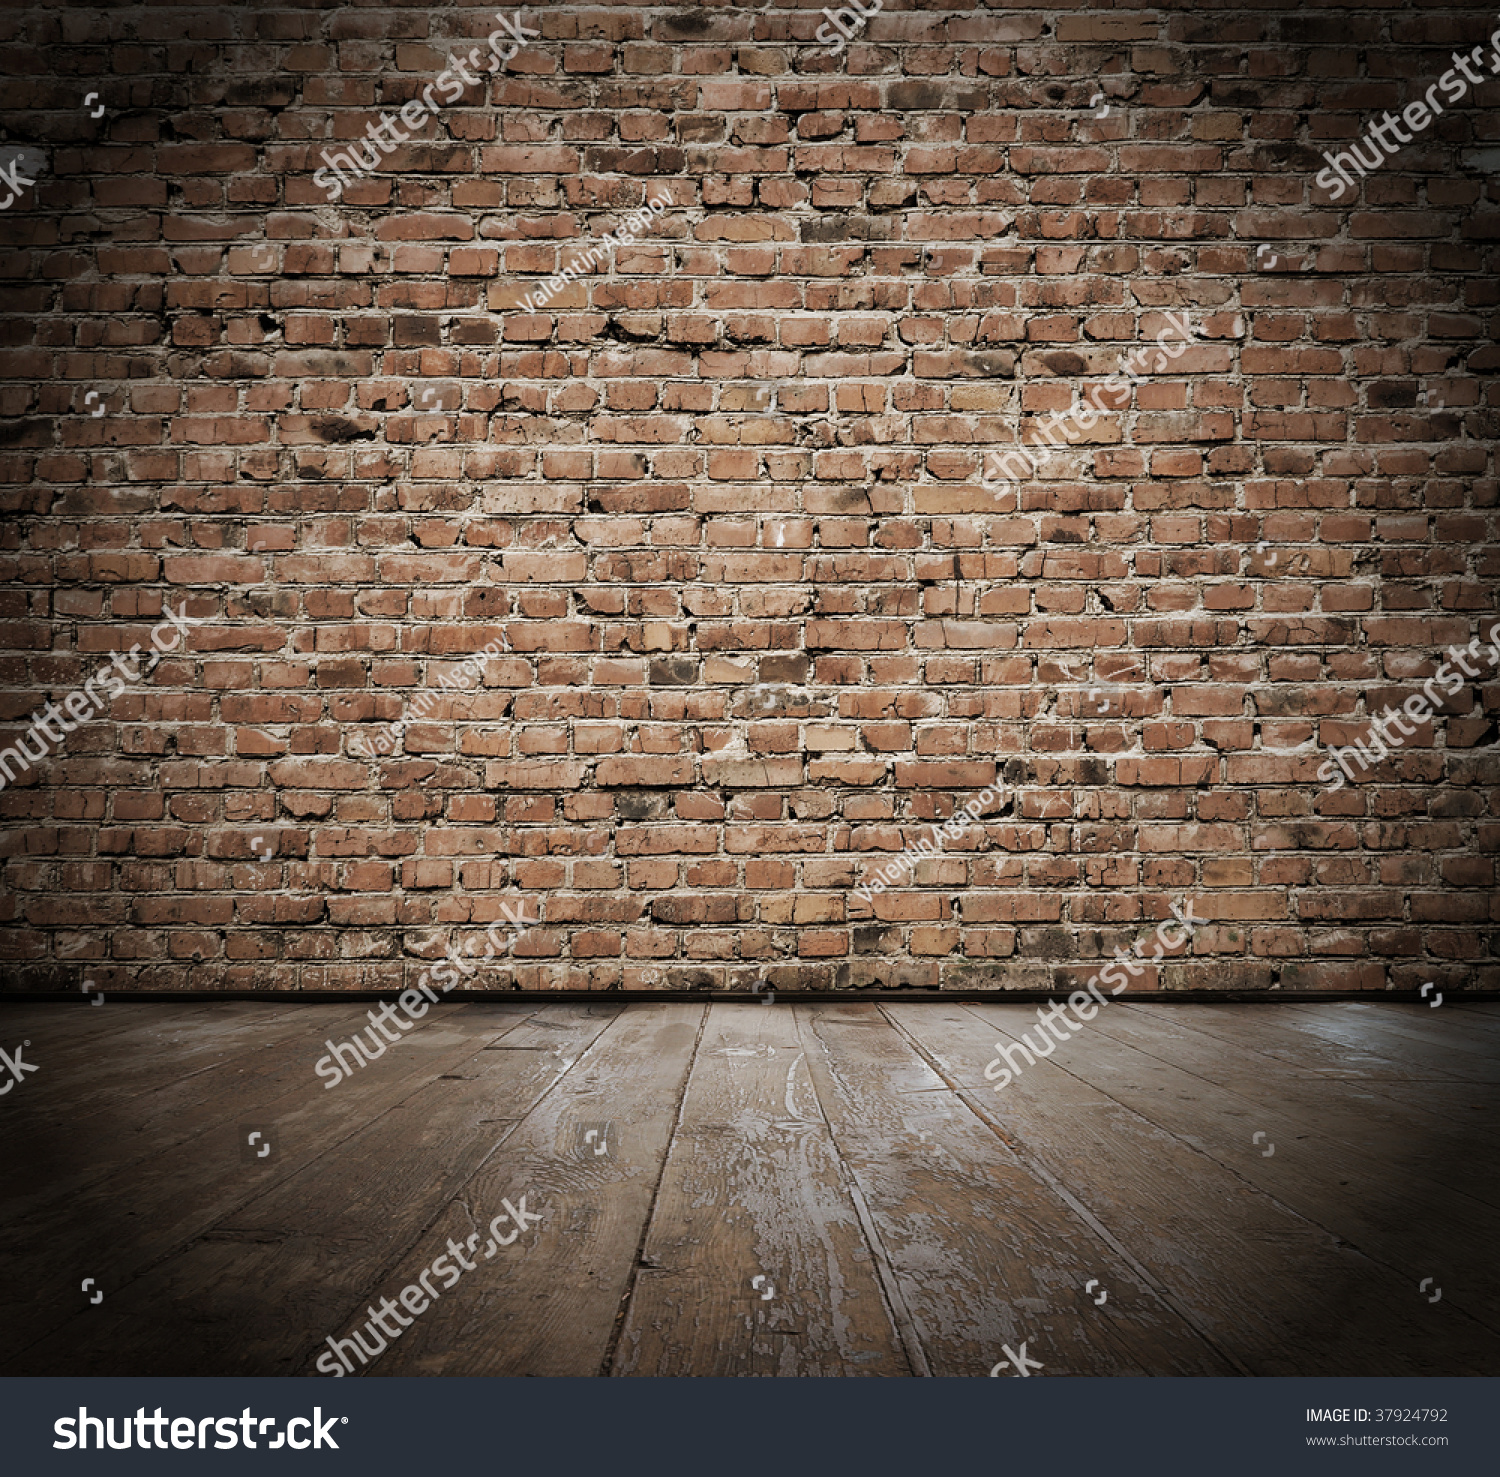 Vintage Interior With Brick Wall Stock Photo 37924792 : Shutterstock